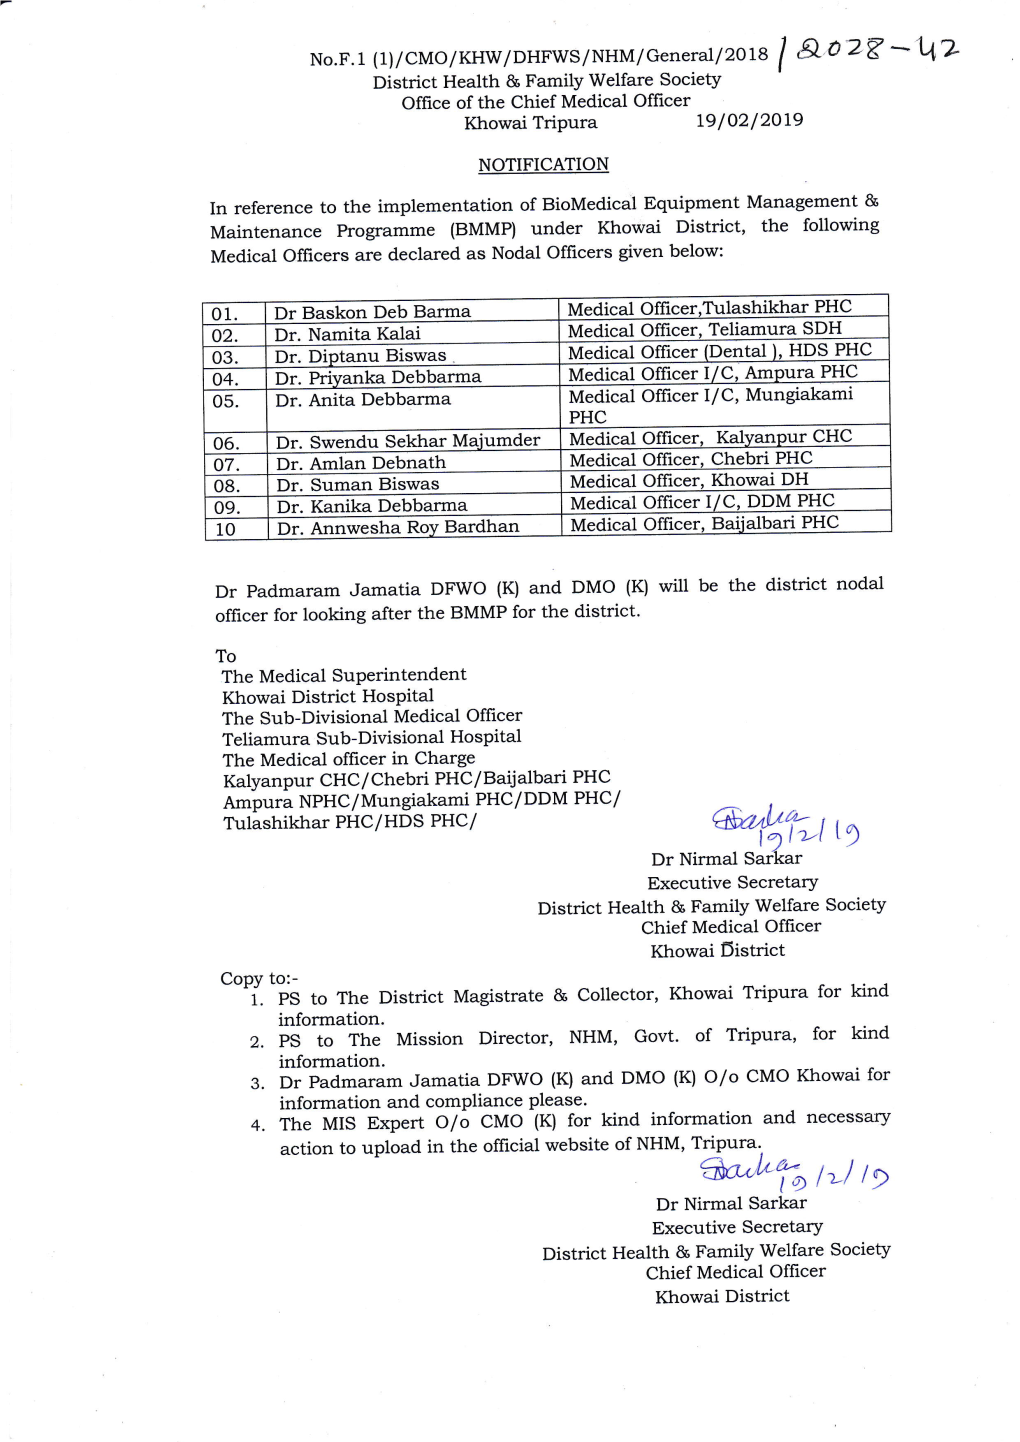 Under Khowai District, the Following Medical Officers Are Declared As Nodal Oflicers Glven Below